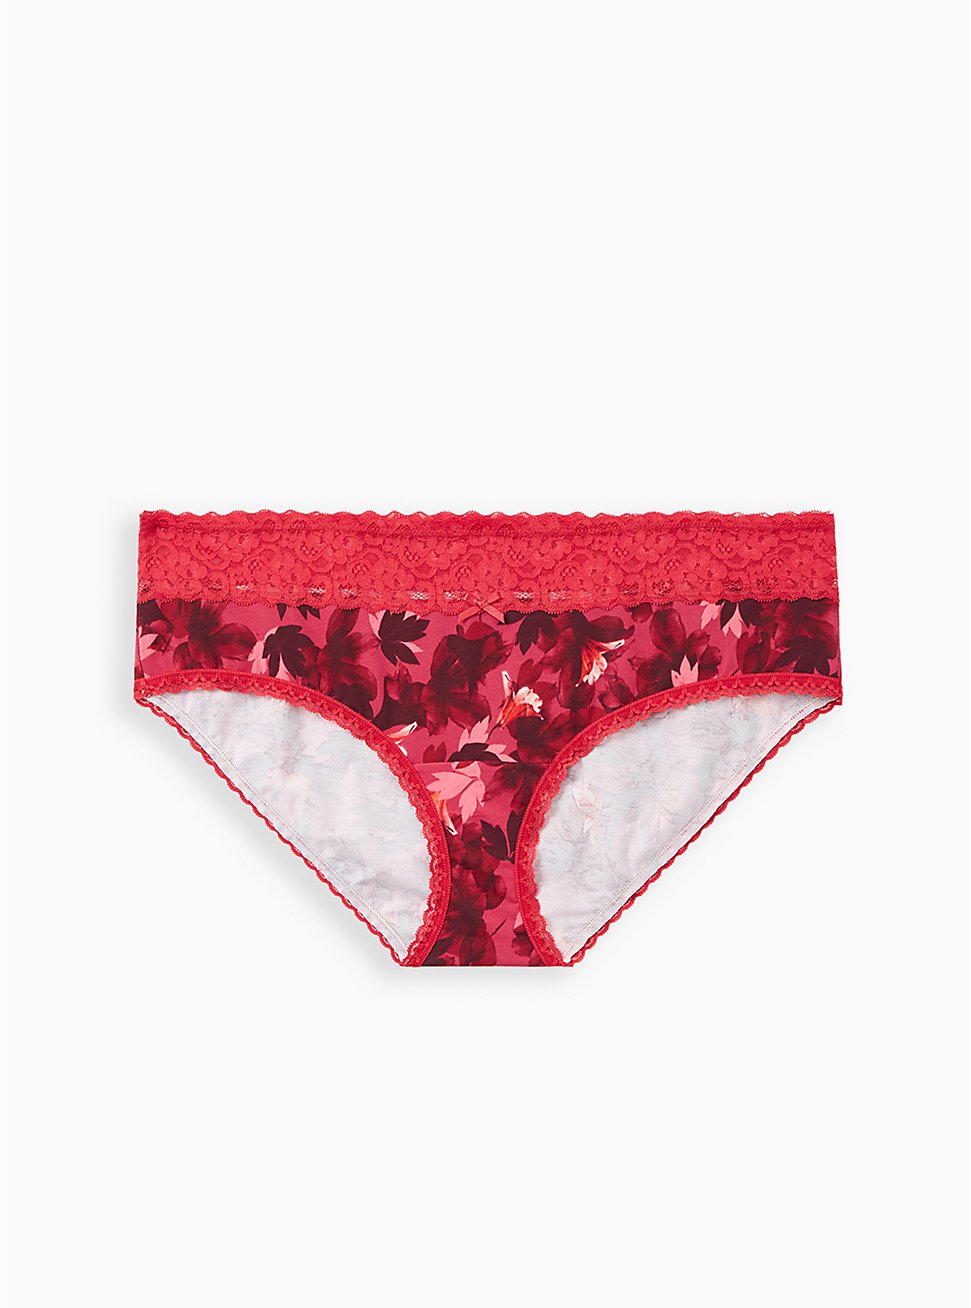 Plus Size Wide Lace Trim Hipster Panty - Cotton Blooms Red, DRAMATIC BLOOMS RED  , hi-res